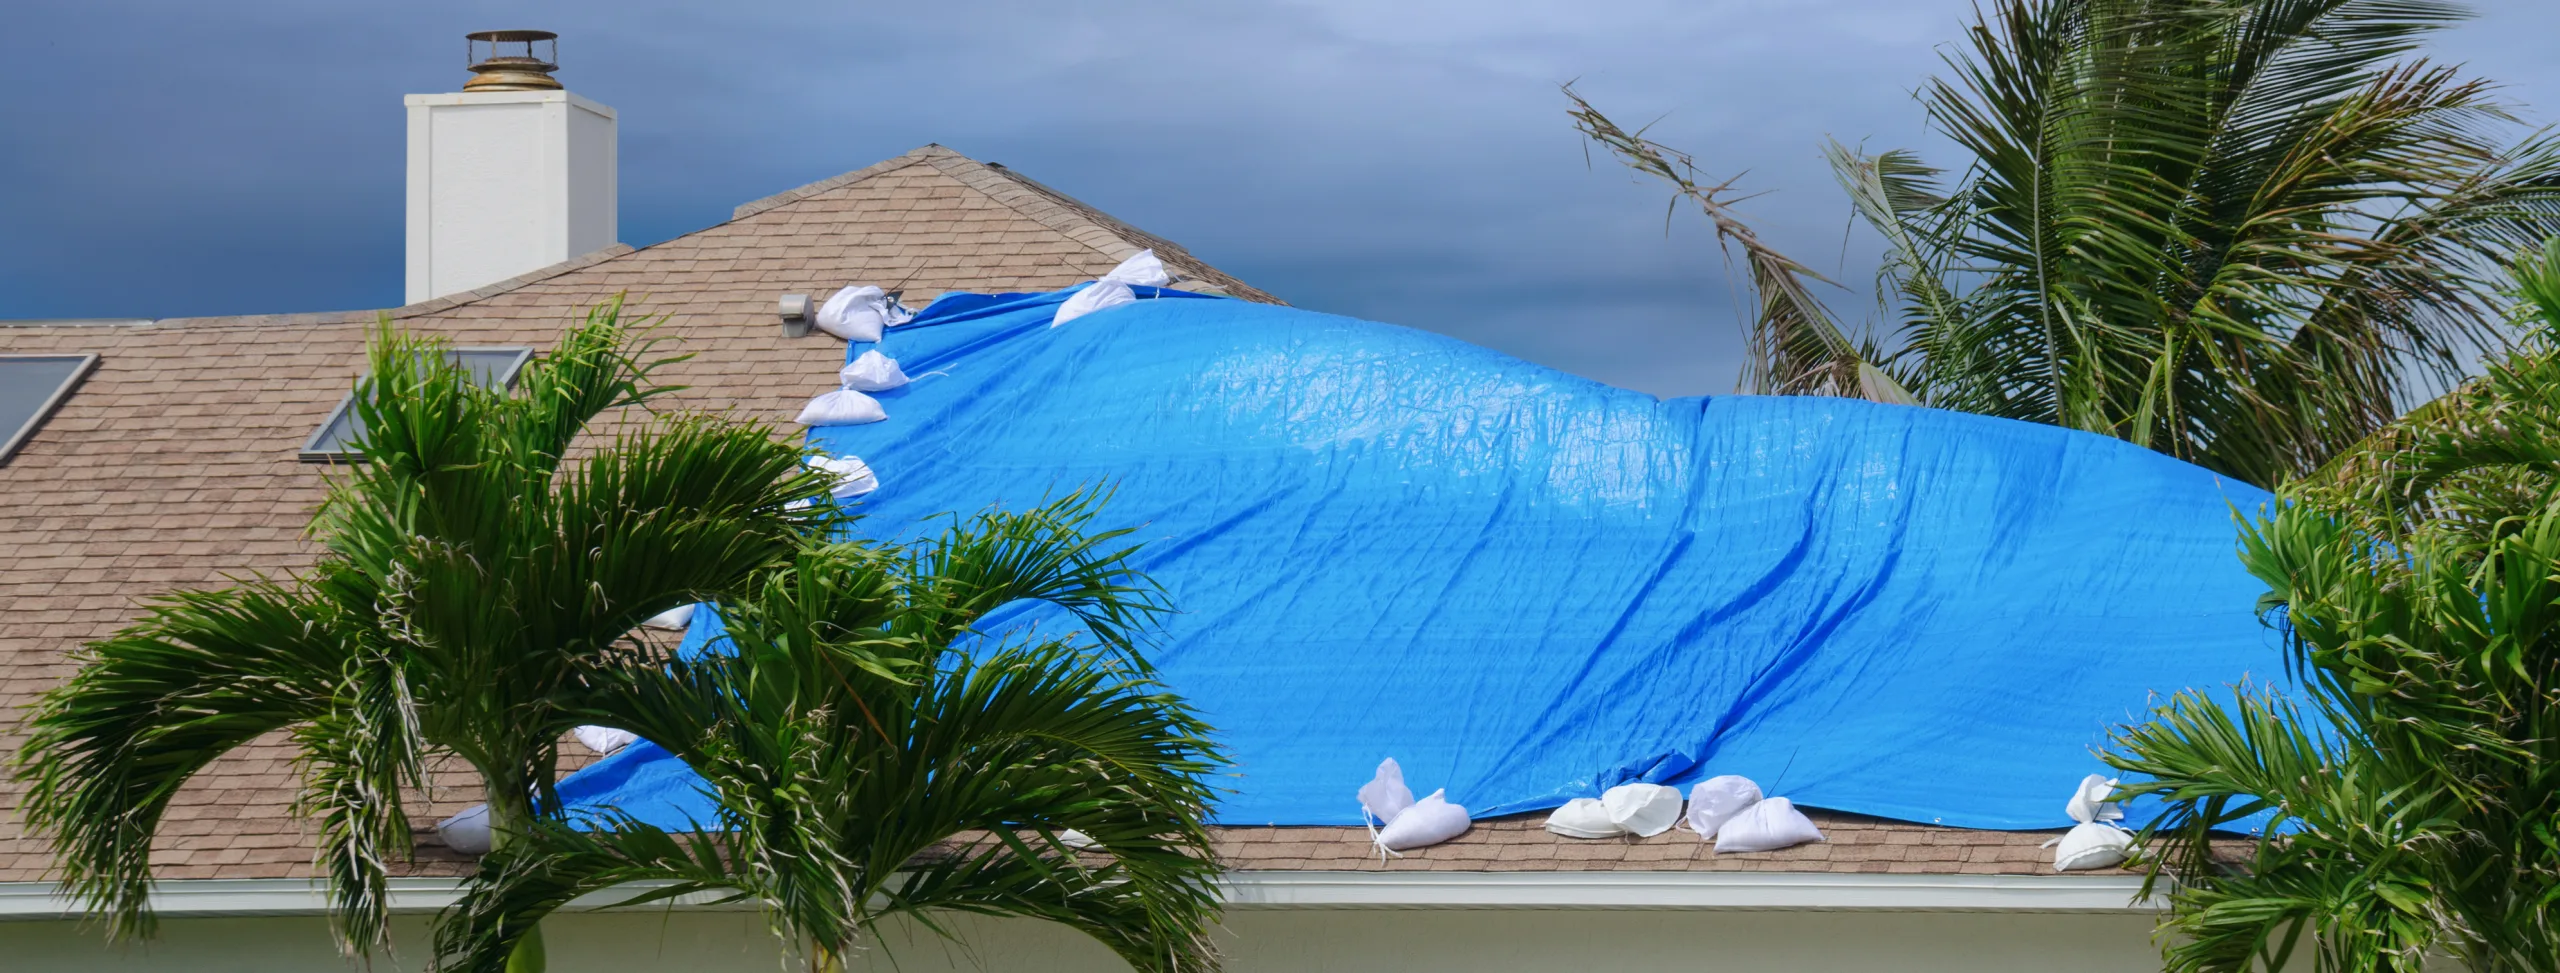 Storm damaged tile roof with tarpaulin.